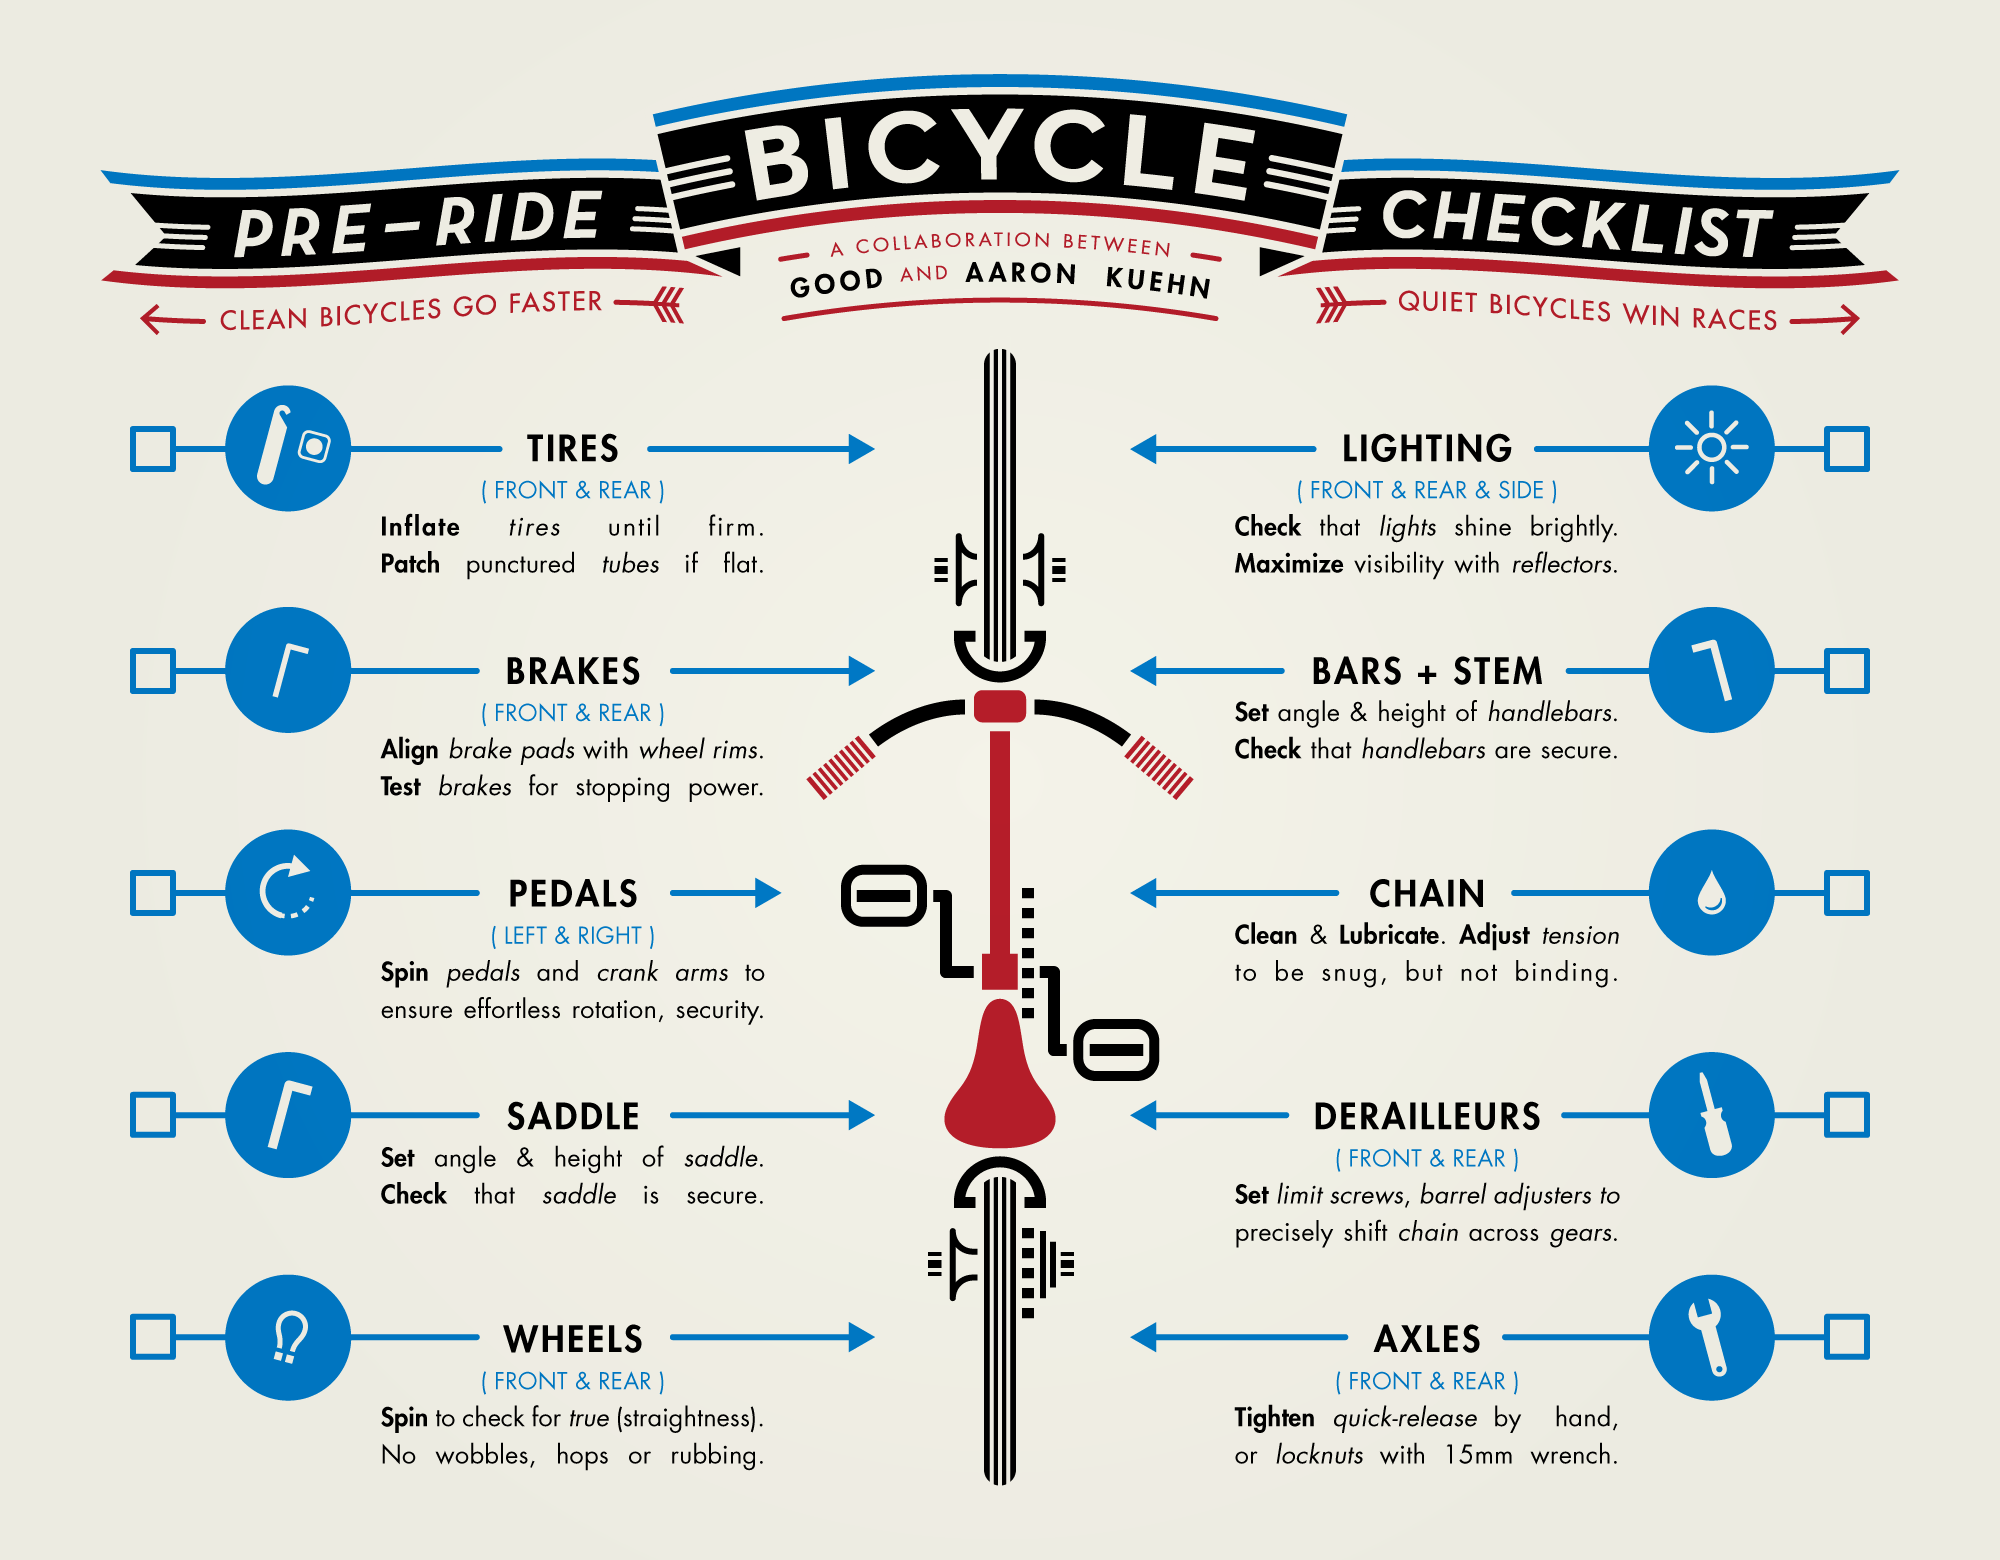 Get Your Bike Ready For A Ride With This 10-Point Checklist